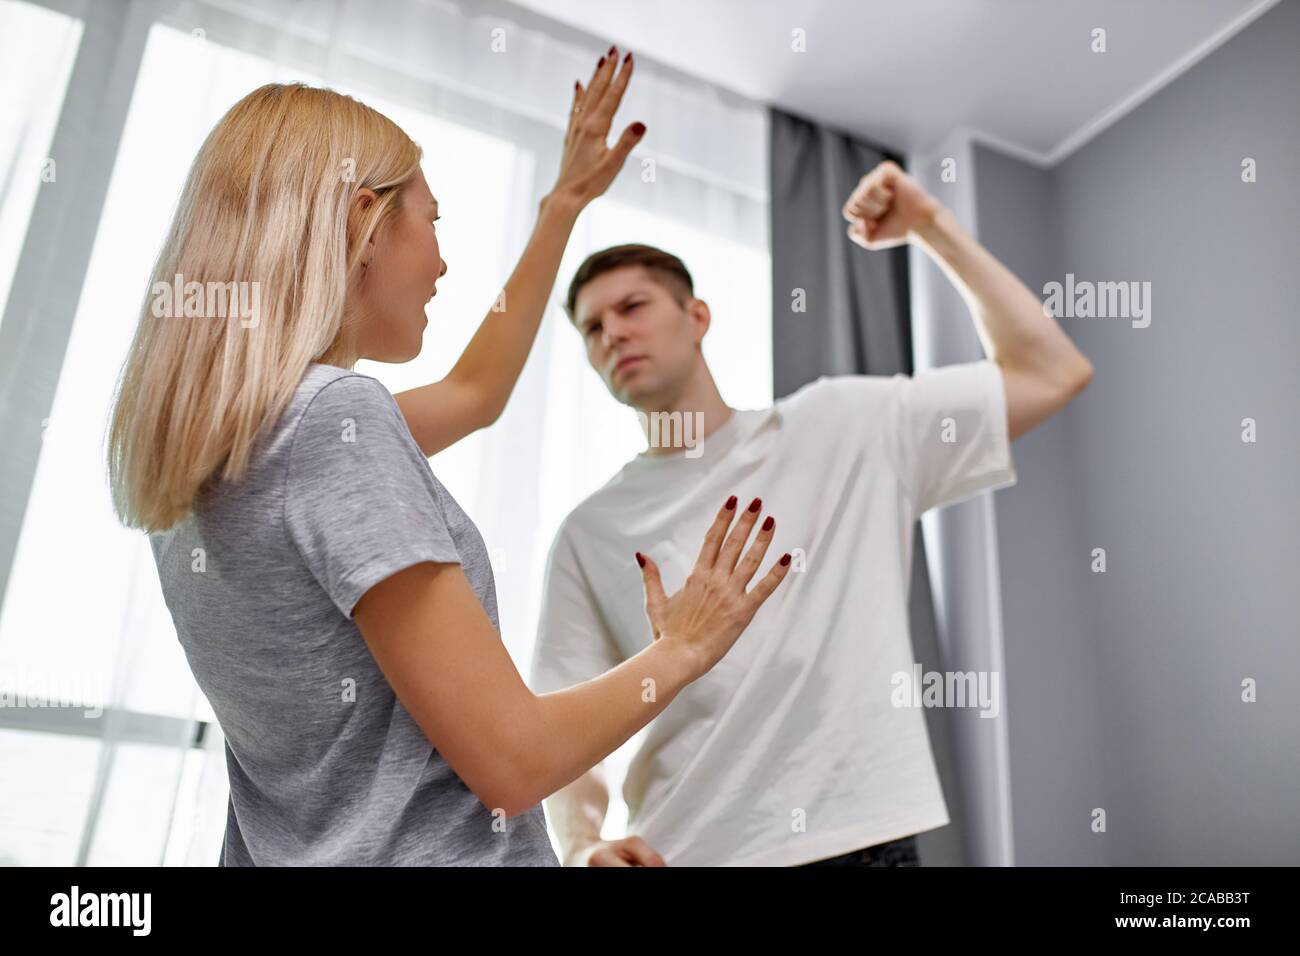 domestic violence, man raises his hand to wife, going to beat and humiliate her at home, woman afraid of him. abusive relationships concept Stock Photo